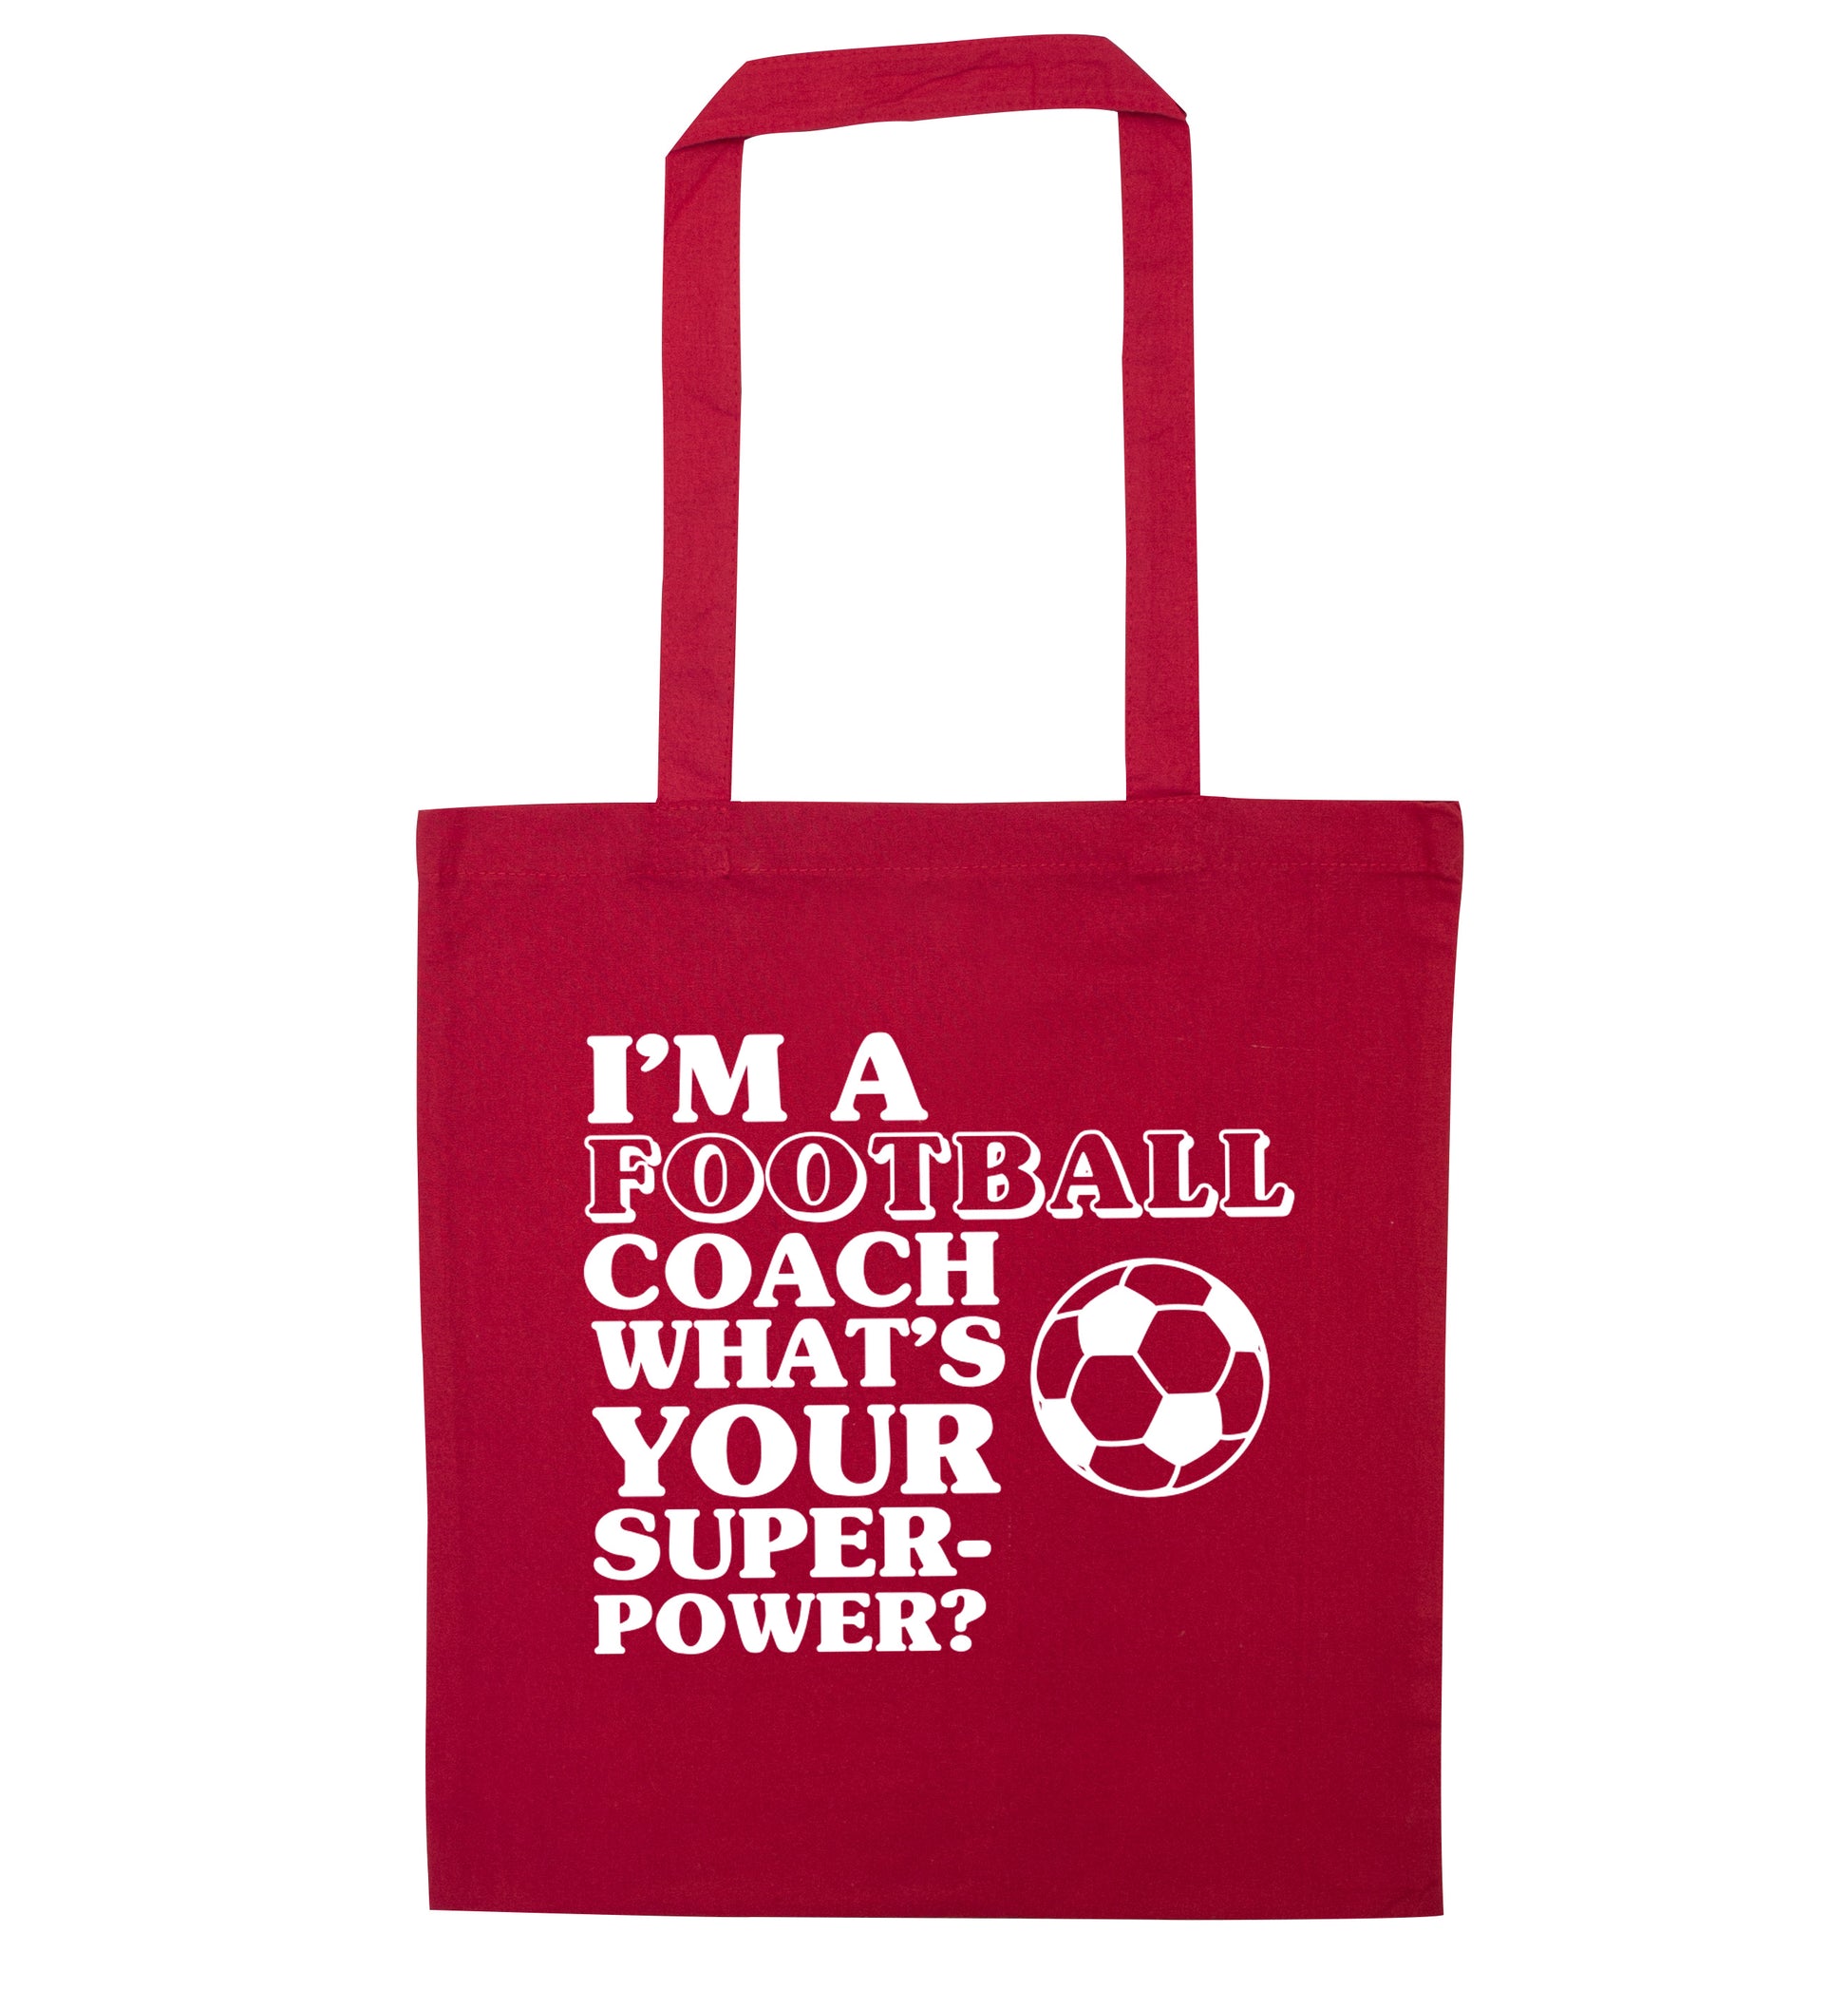 I'm a football coach what's your superpower? red tote bag